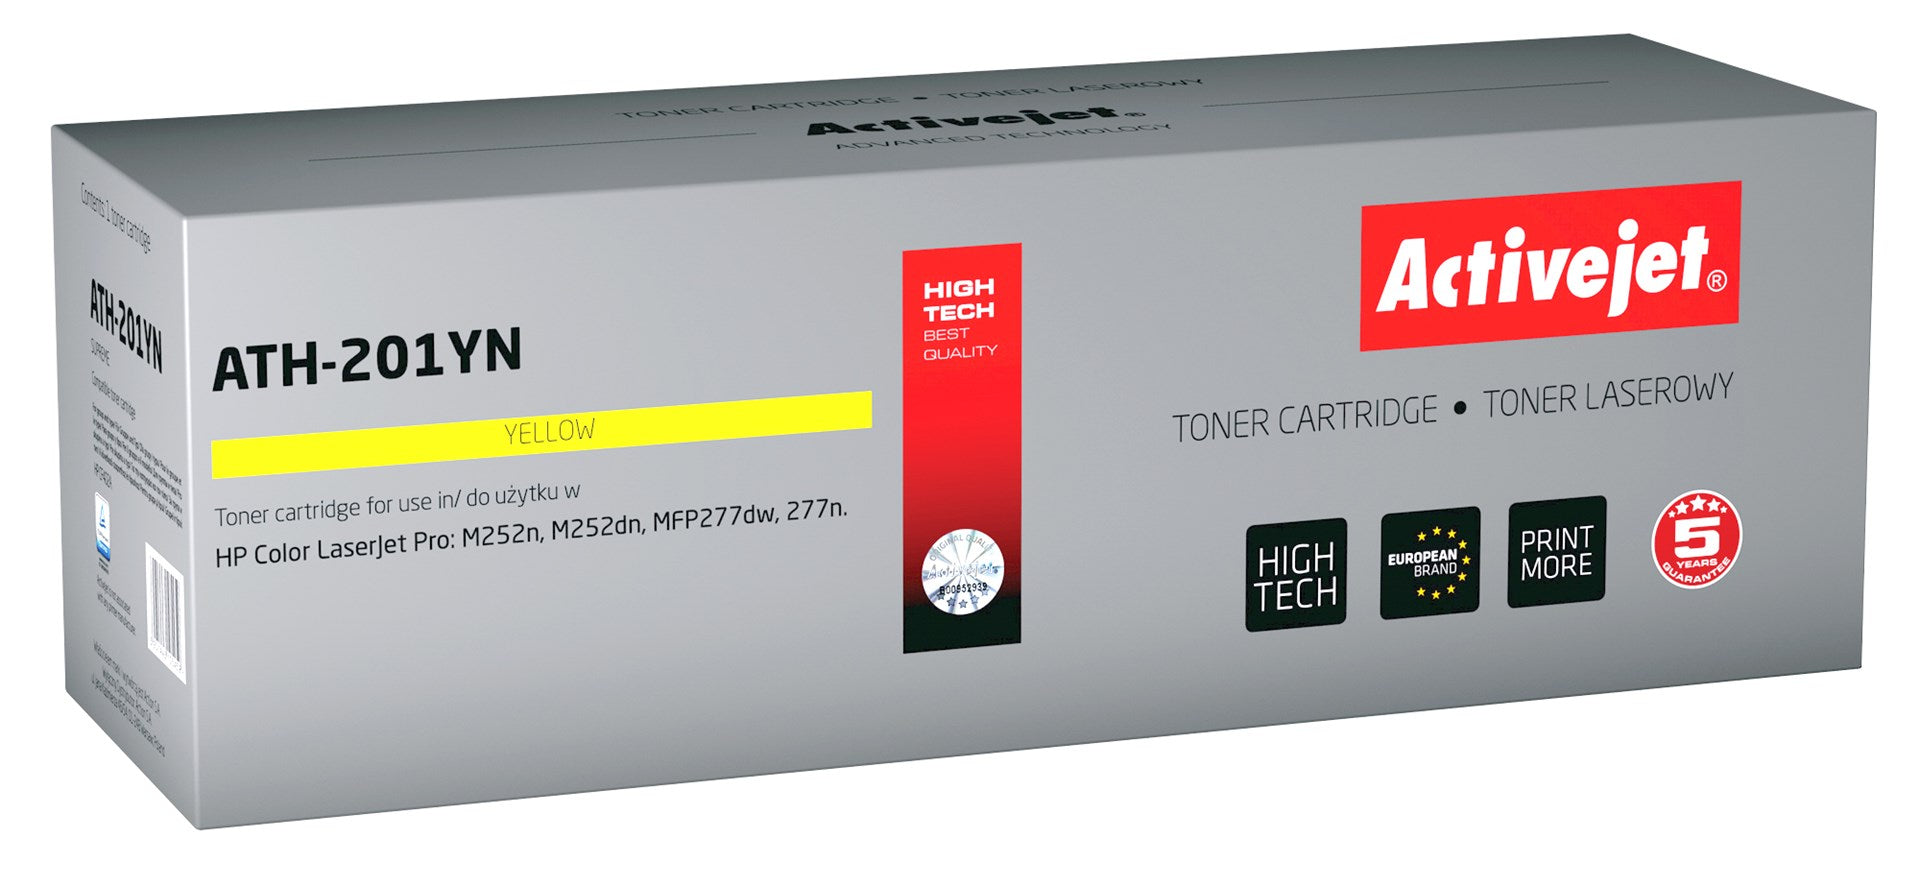 Activejet ATH-201YN toner for HP printer, HP 201A CF402A replacement, Supreme, 1400 pages, yellow - KorhoneCom